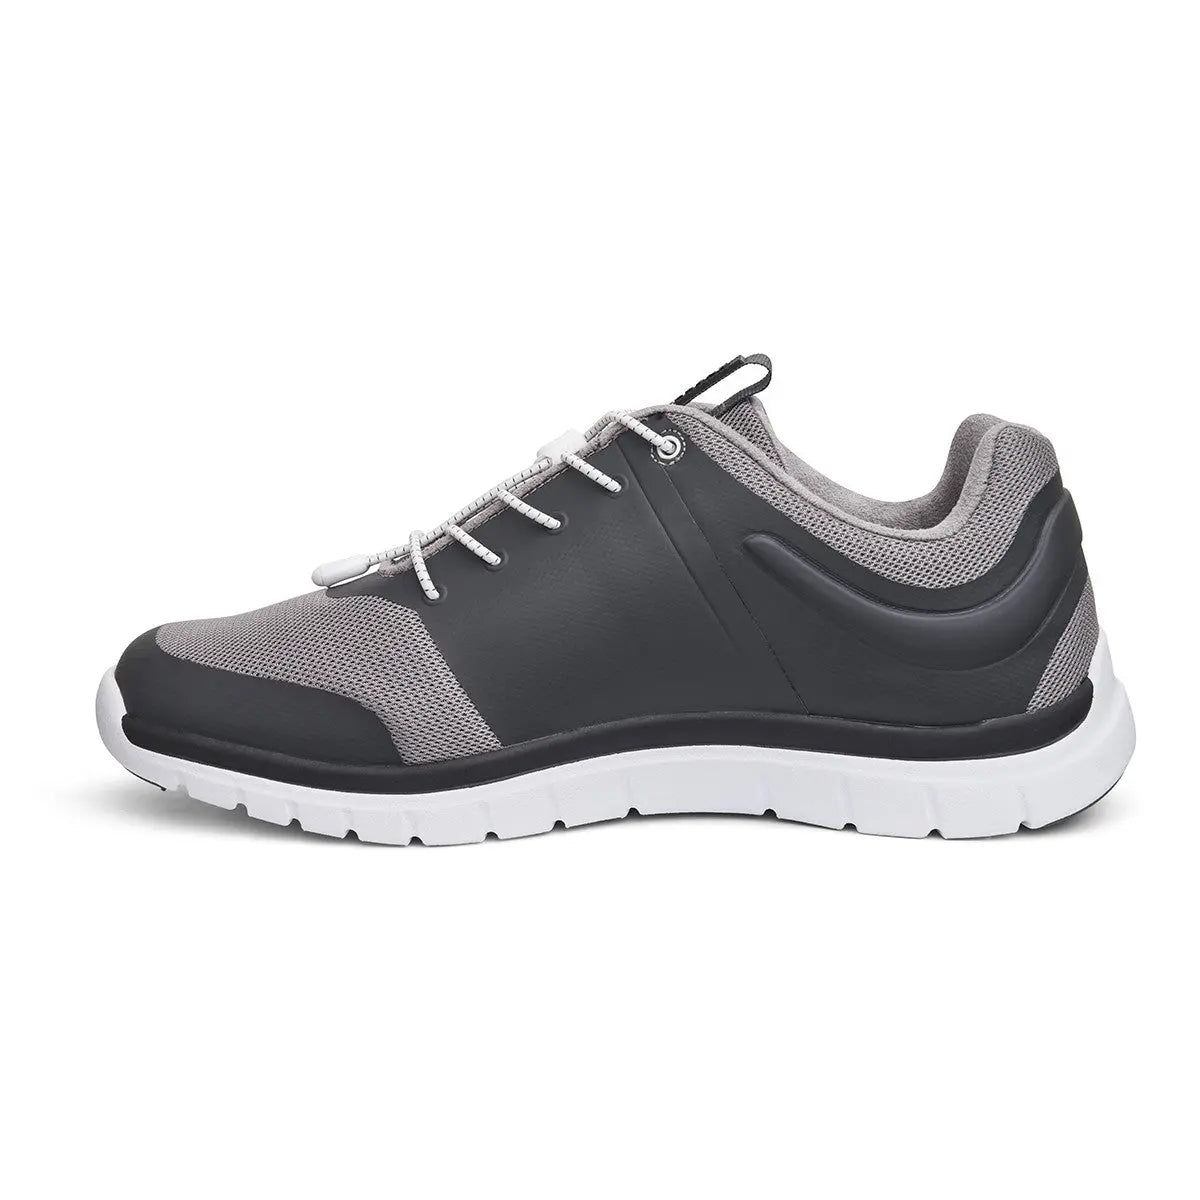 Anodyne Men's No.22 Sport Runner - Grey has a microfiber lining for all day comfort